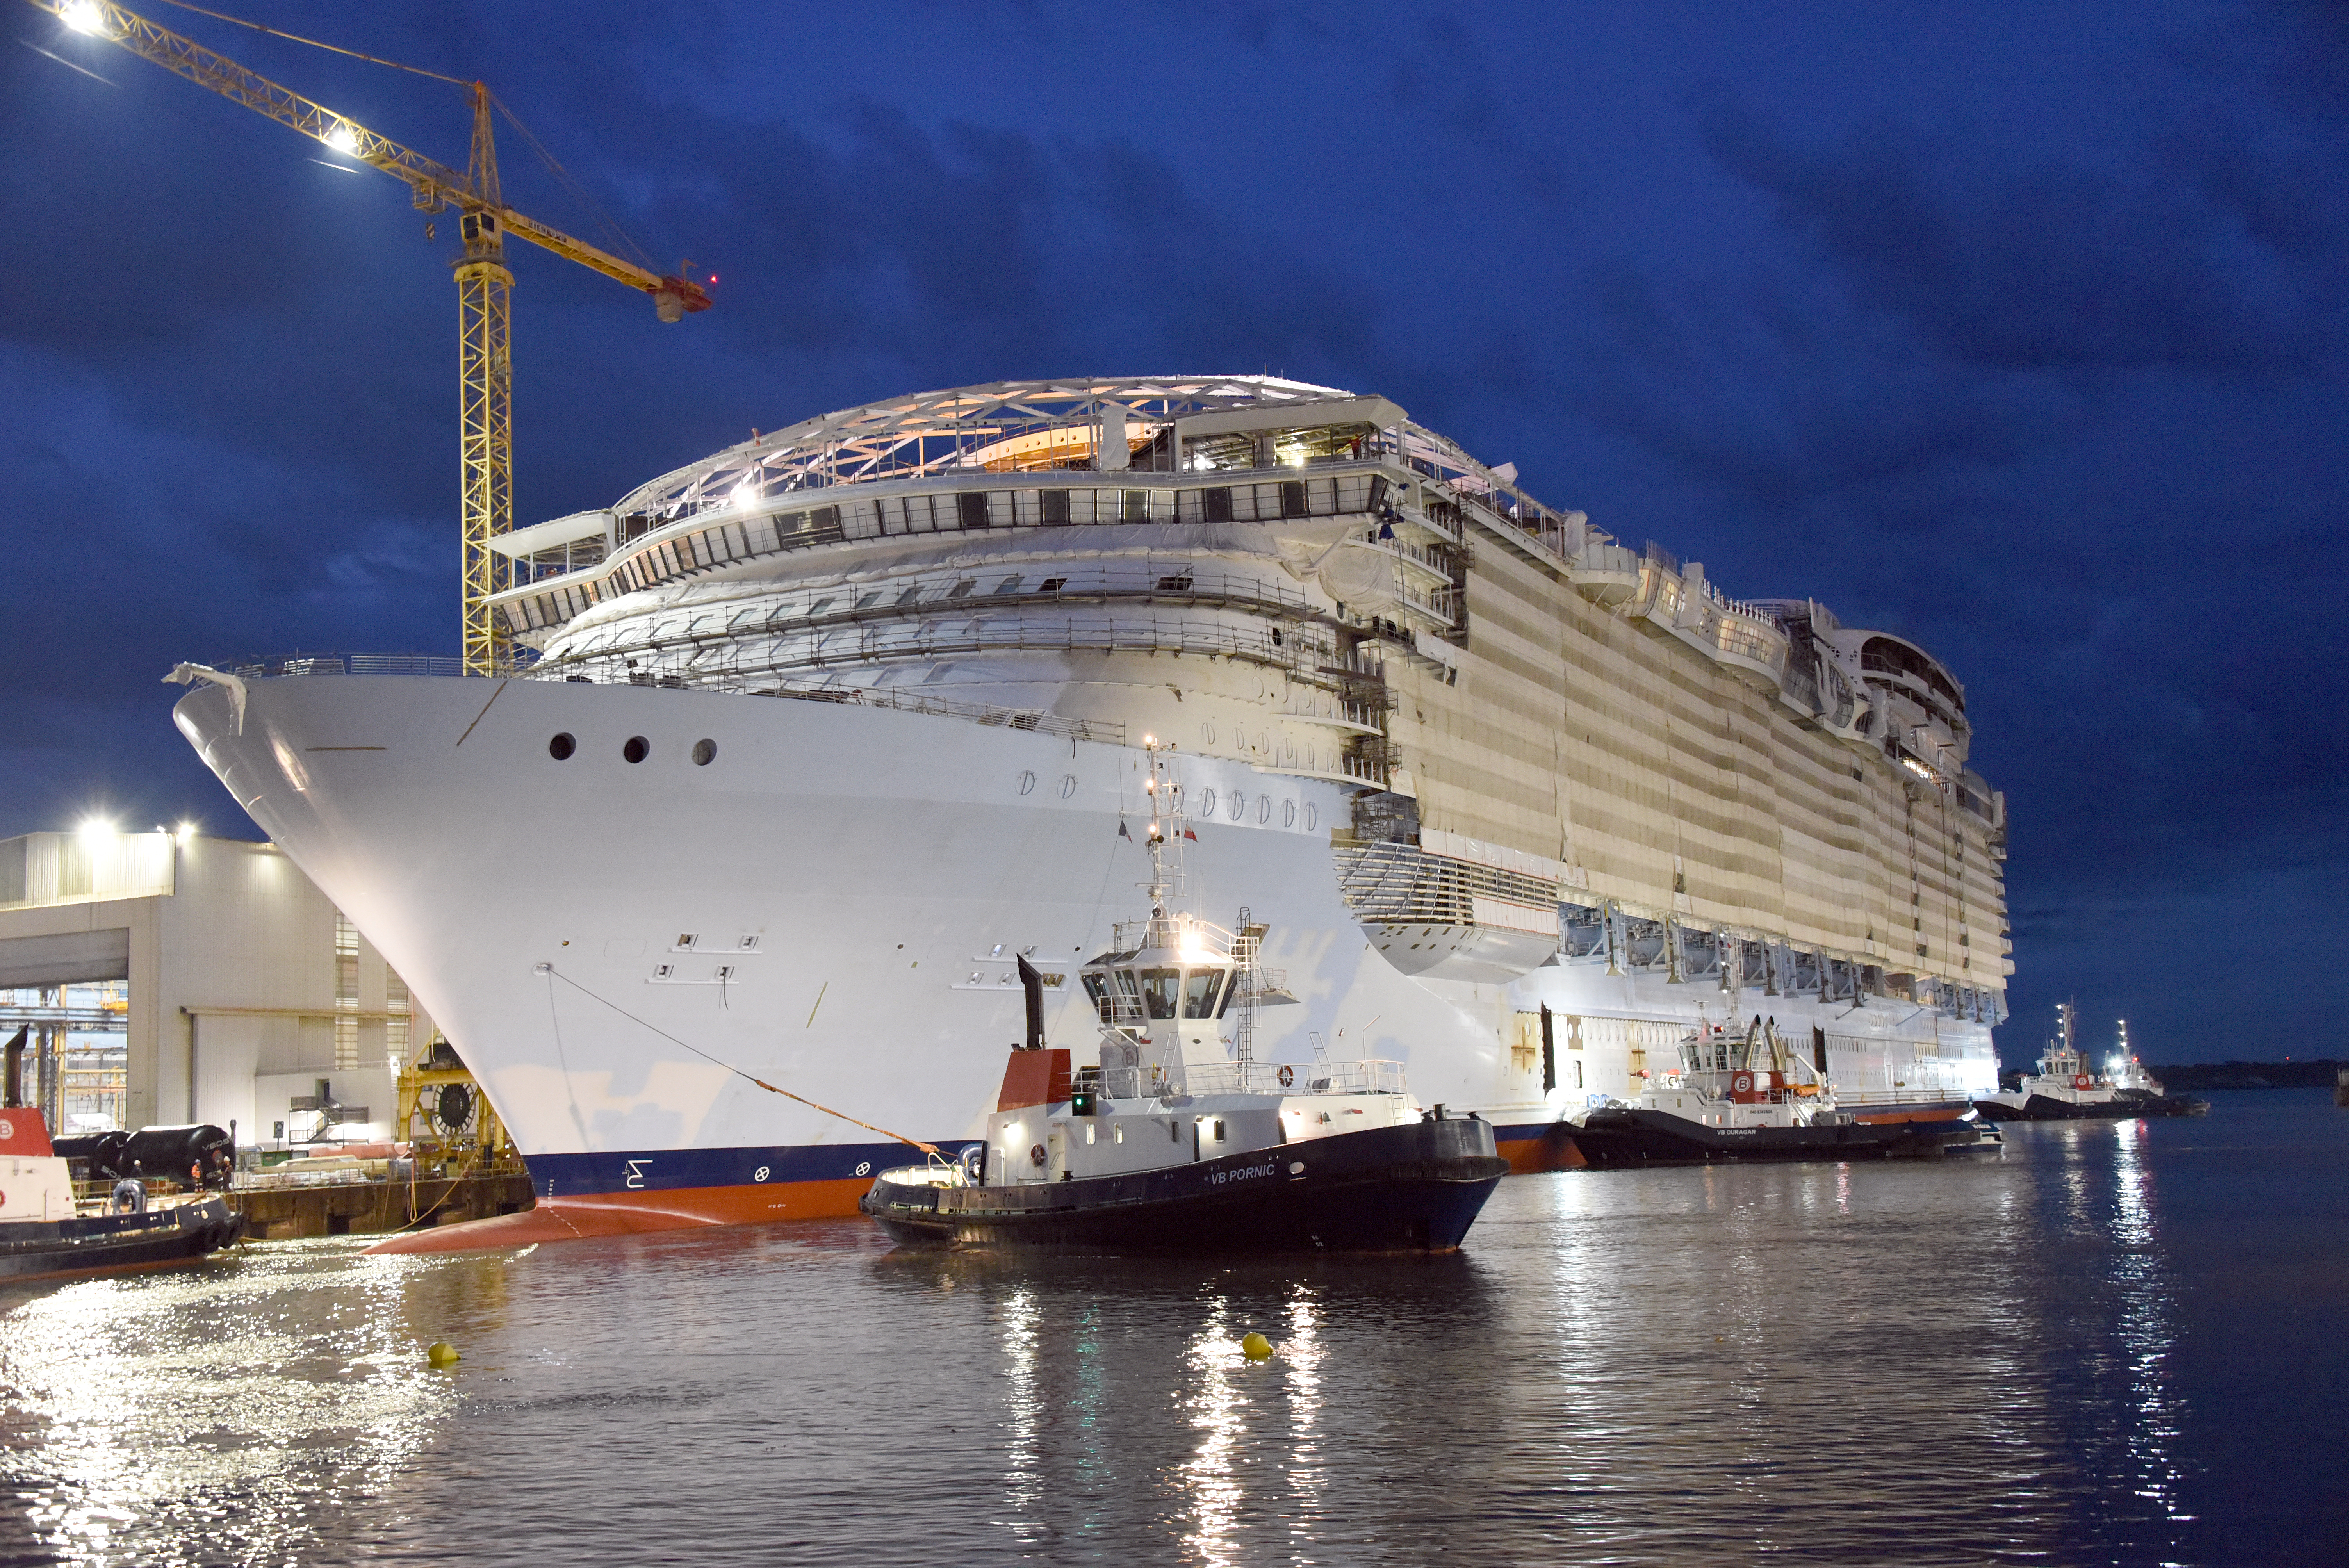 Oasis Class ship Utopia of the Seas floated for the first time over the weekend  - Credit: Chantiers de l’Atlantique / Bernard Biger (Image at LateCruiseNews.com - September 2023)